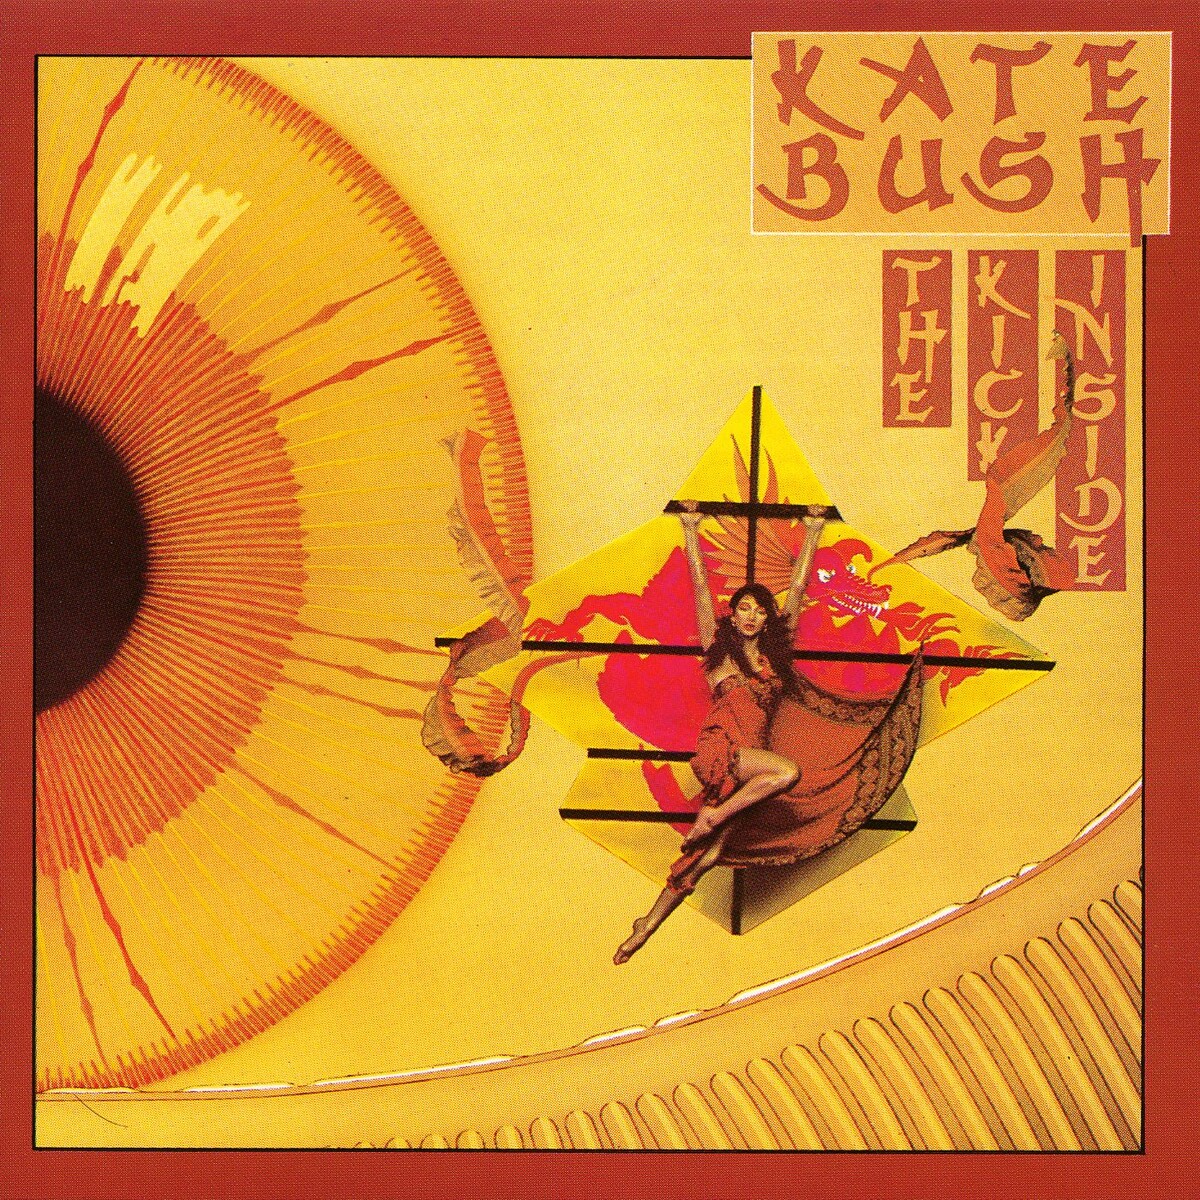 The album cover. On the top right, the name “Kate Bush” and the title “The Kick Inside” are written using a font that reminds of Chinese calligraphy. On the left, the right half on an eyebulb. At the center, Kate Bush held to a cross-like (or maybe main mast-like?) thing and wearing a red dress. Most of the cover is yellow, but the external “frame” contour is red.